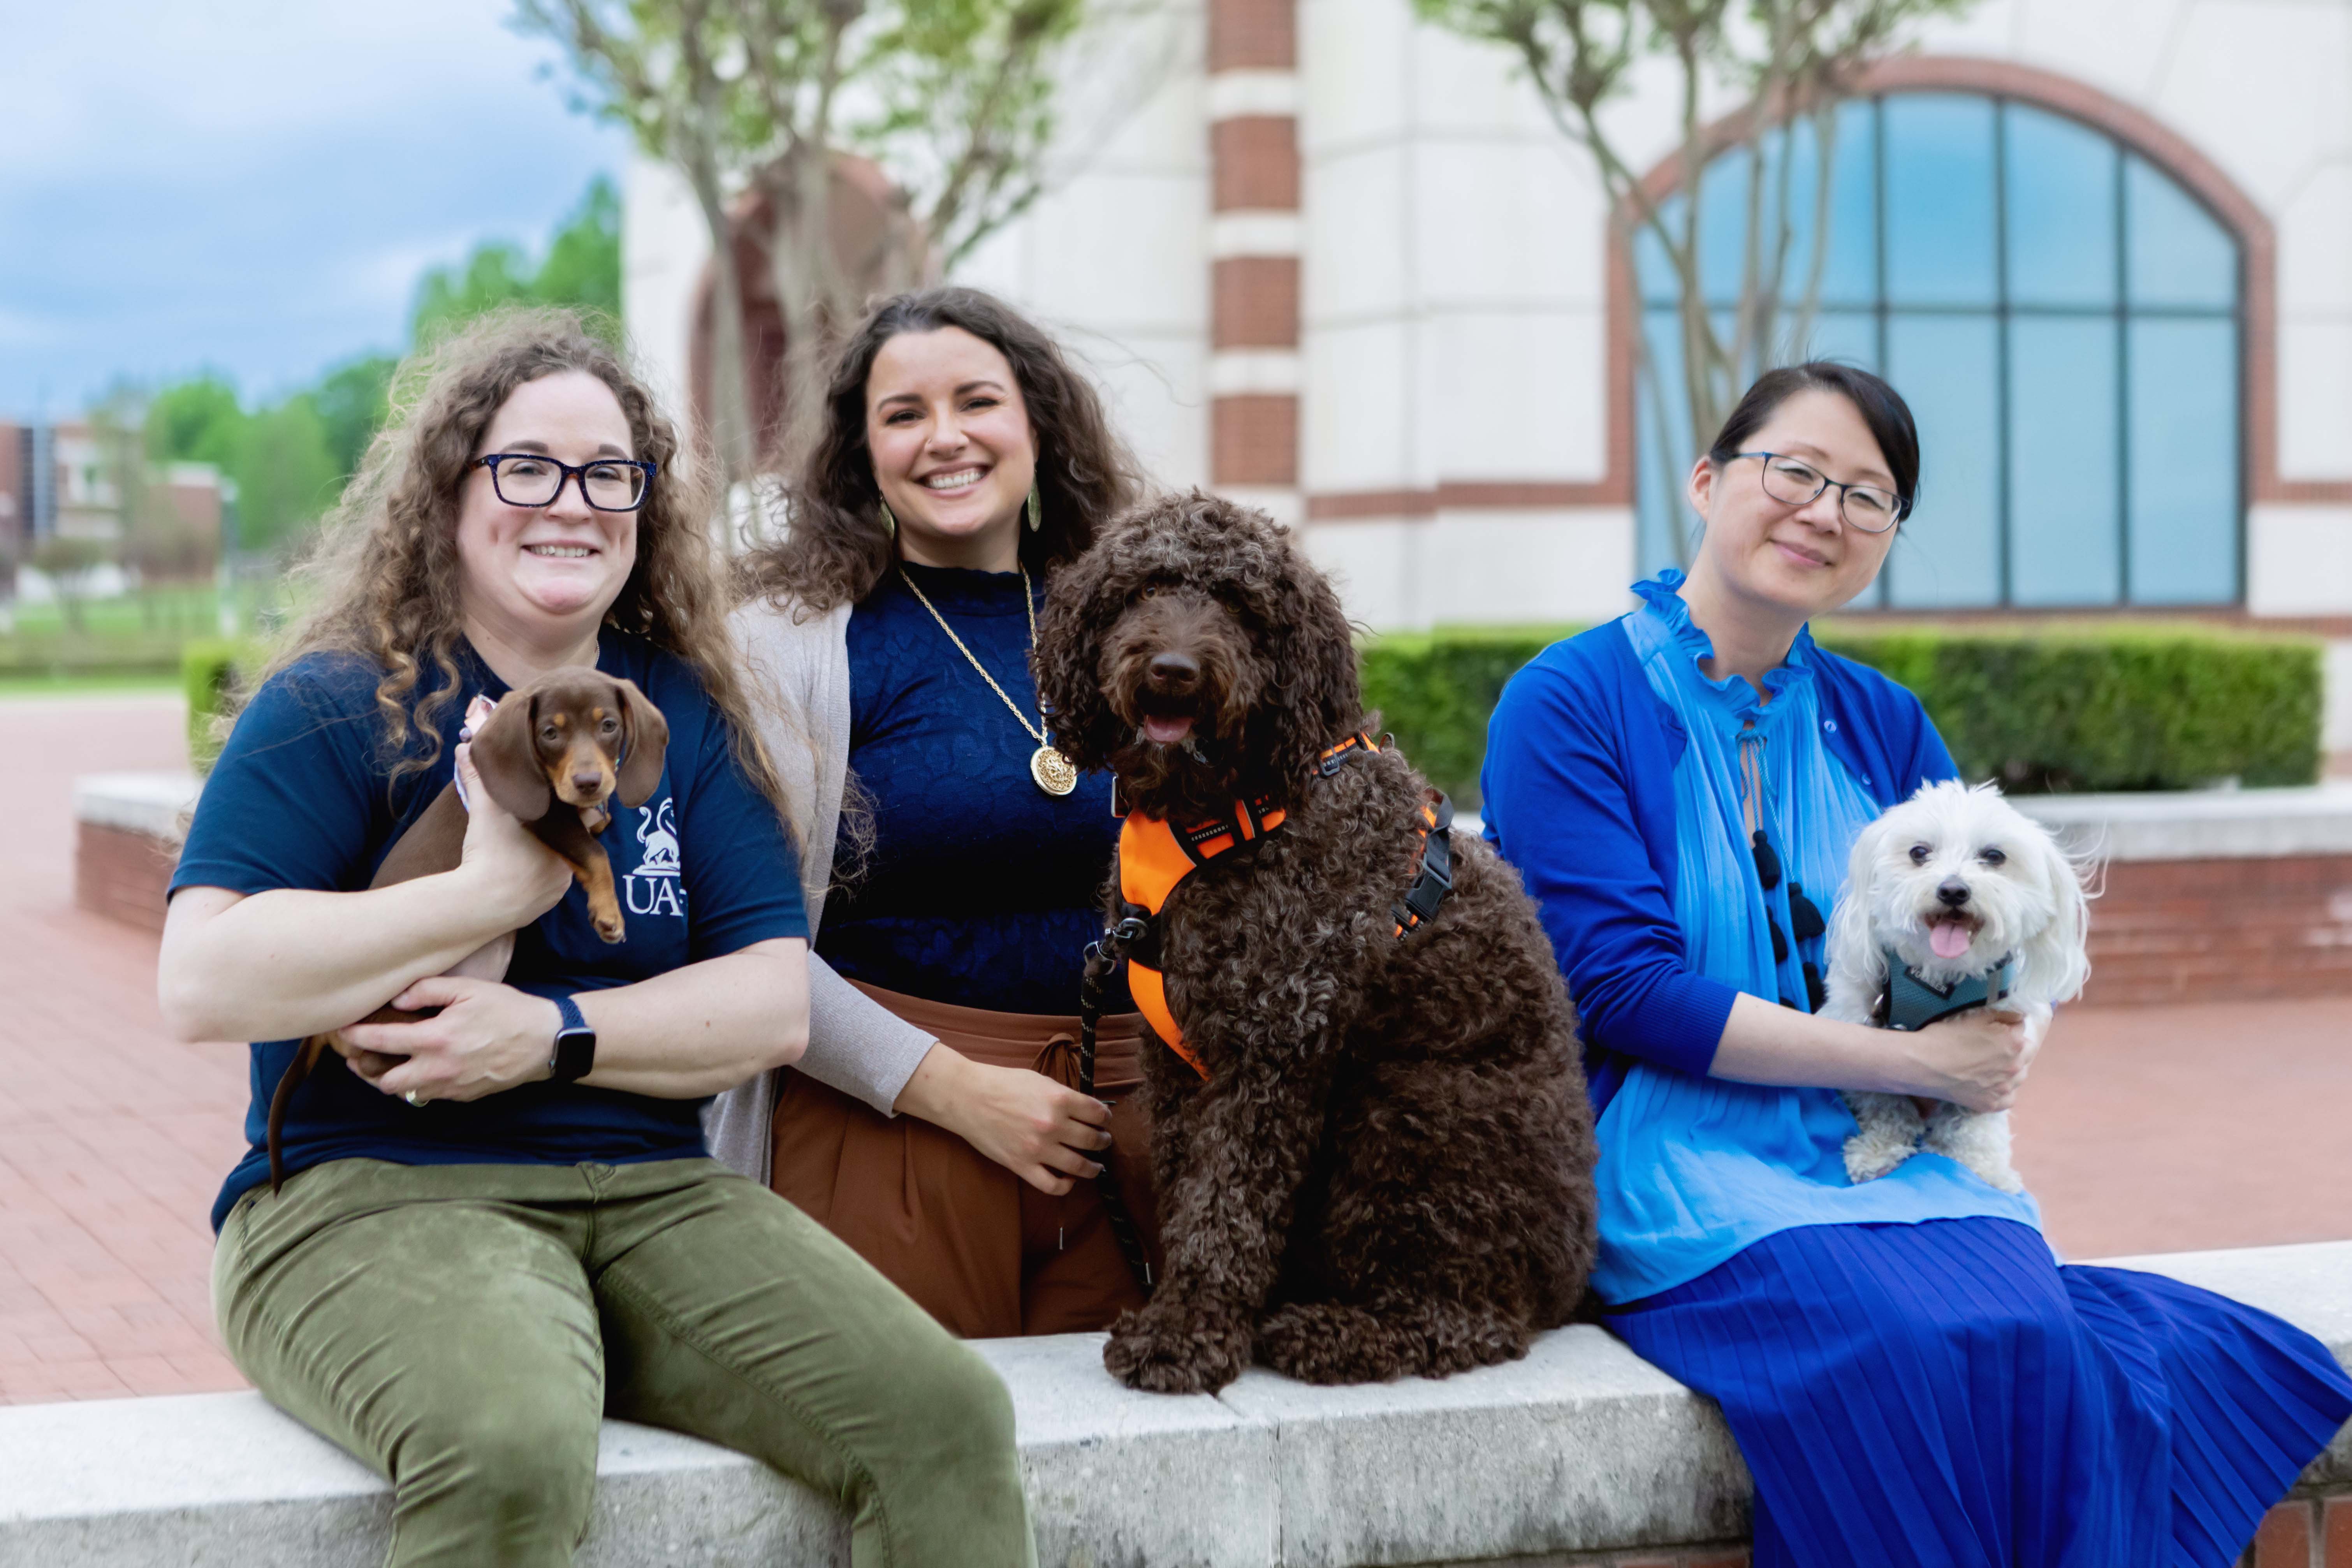 UAFS professors and puppies pose ahead of the UAFS Boreham Library's long night against procrastination event